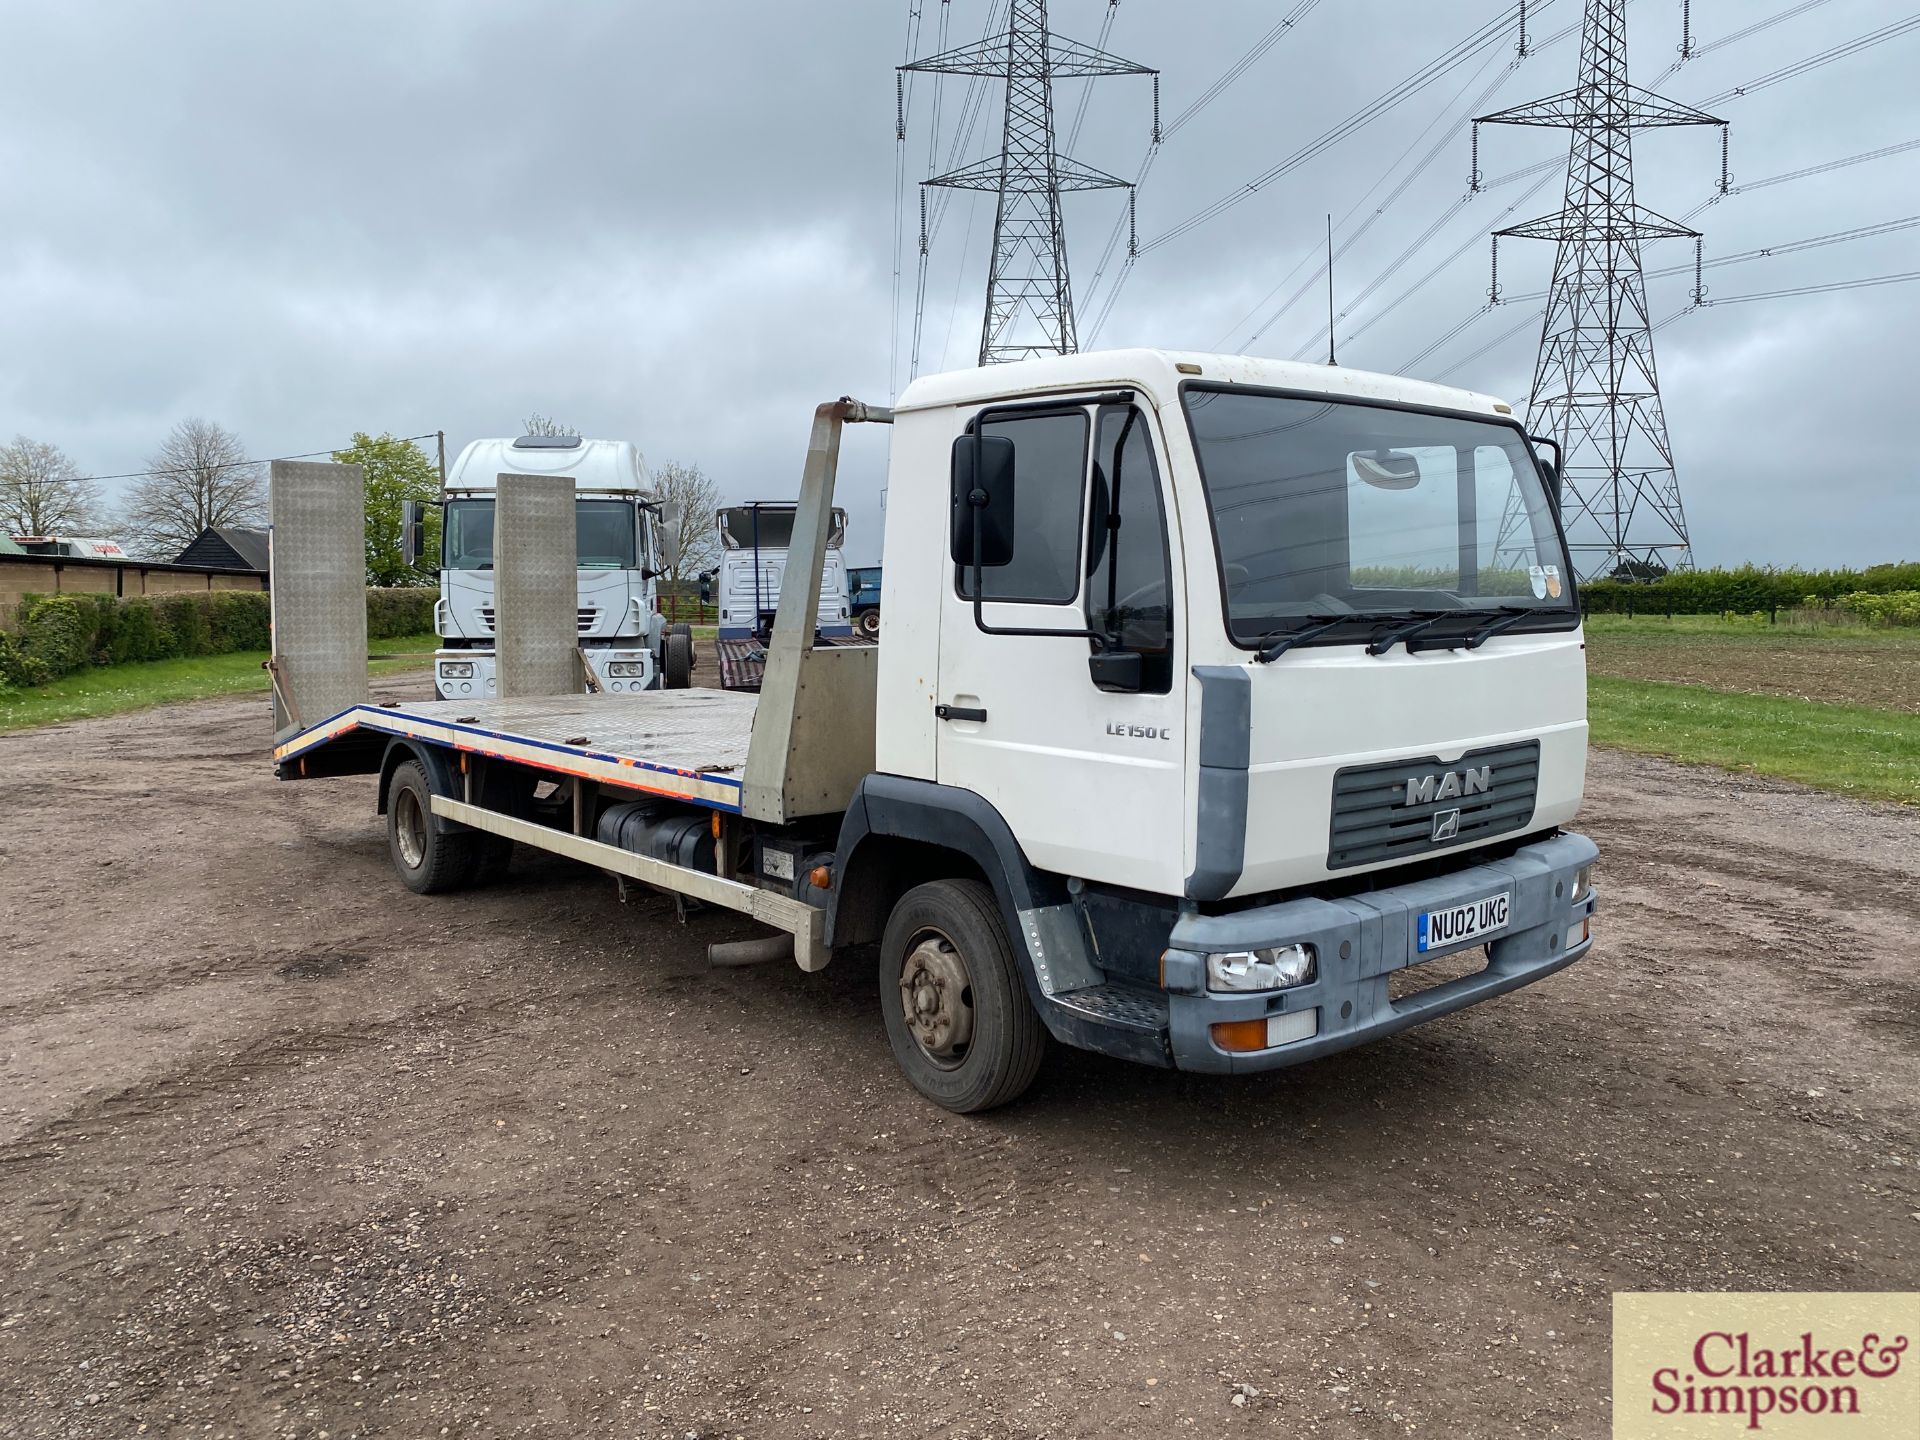 MAN LE150C 7.5T 4x2 beavertail lorry. Registration NU02 UKG. Date of first registration 15/05/ - Image 7 of 46